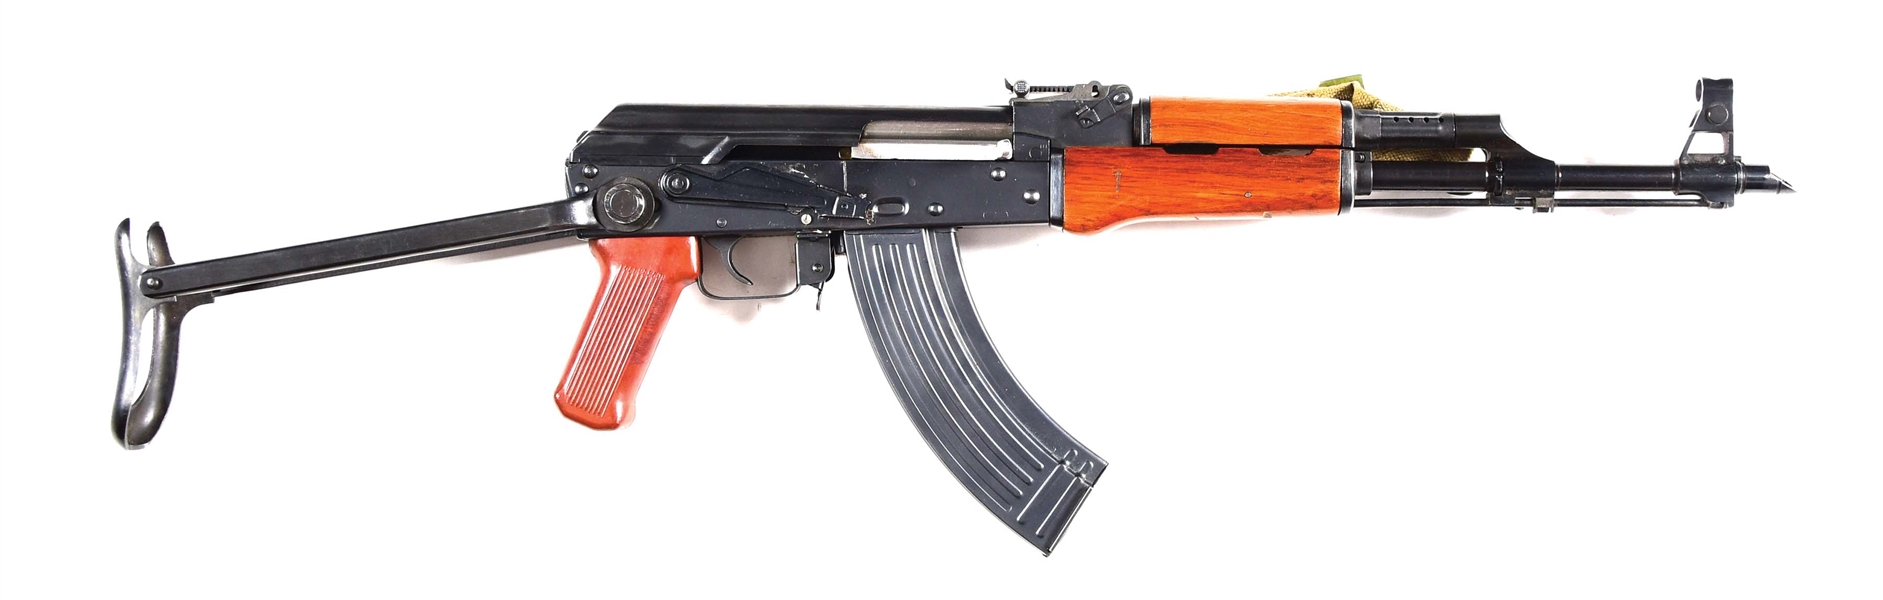 (N) BEAUTIFUL HIGH CONDITION BARR ARMSMAKER REGISTERED RECEIVER CHINESE AK-47 FOLDING STOCK MACHINE GUN (FULLY TRANSFERABLE).